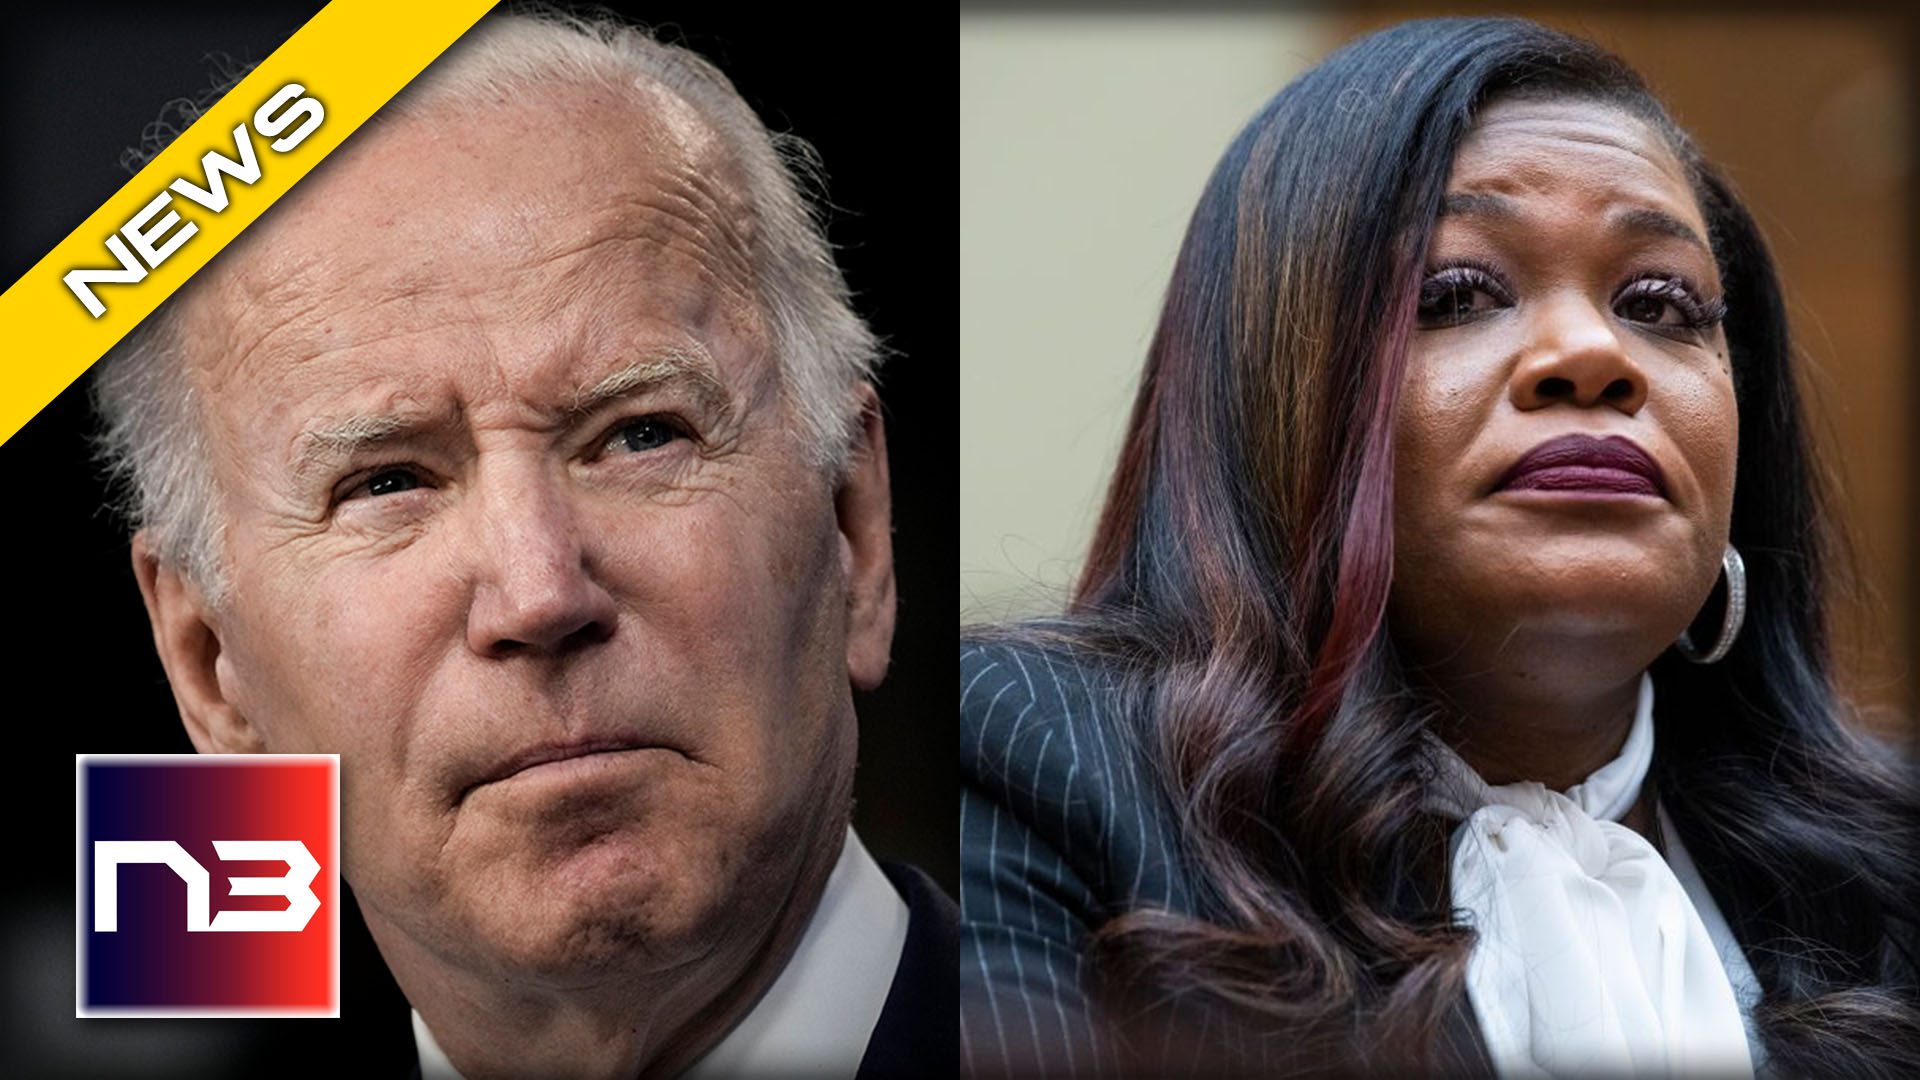 WHOOPS! Squad Member SPEECHLESS When Asked If Biden is the Best Democrat to Run in 2024